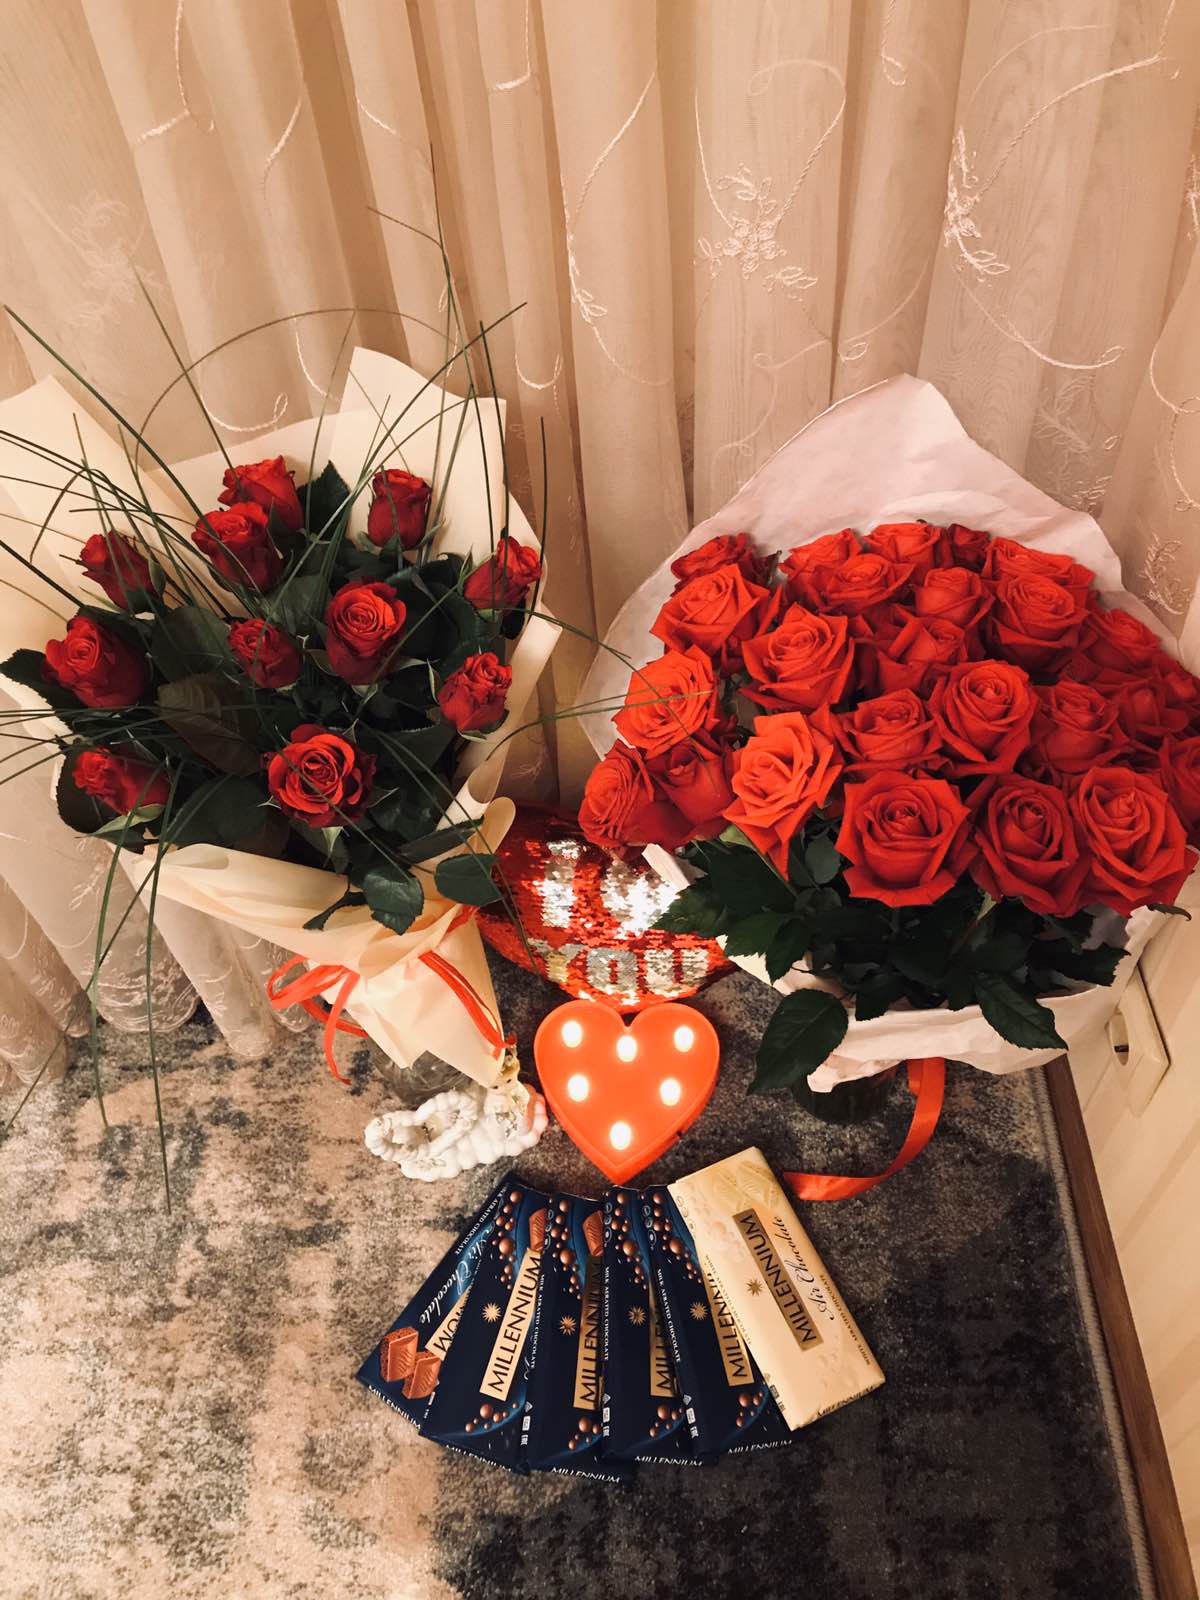 Girl_Smile I love flowers and gifts and tokens)😍 image: 1